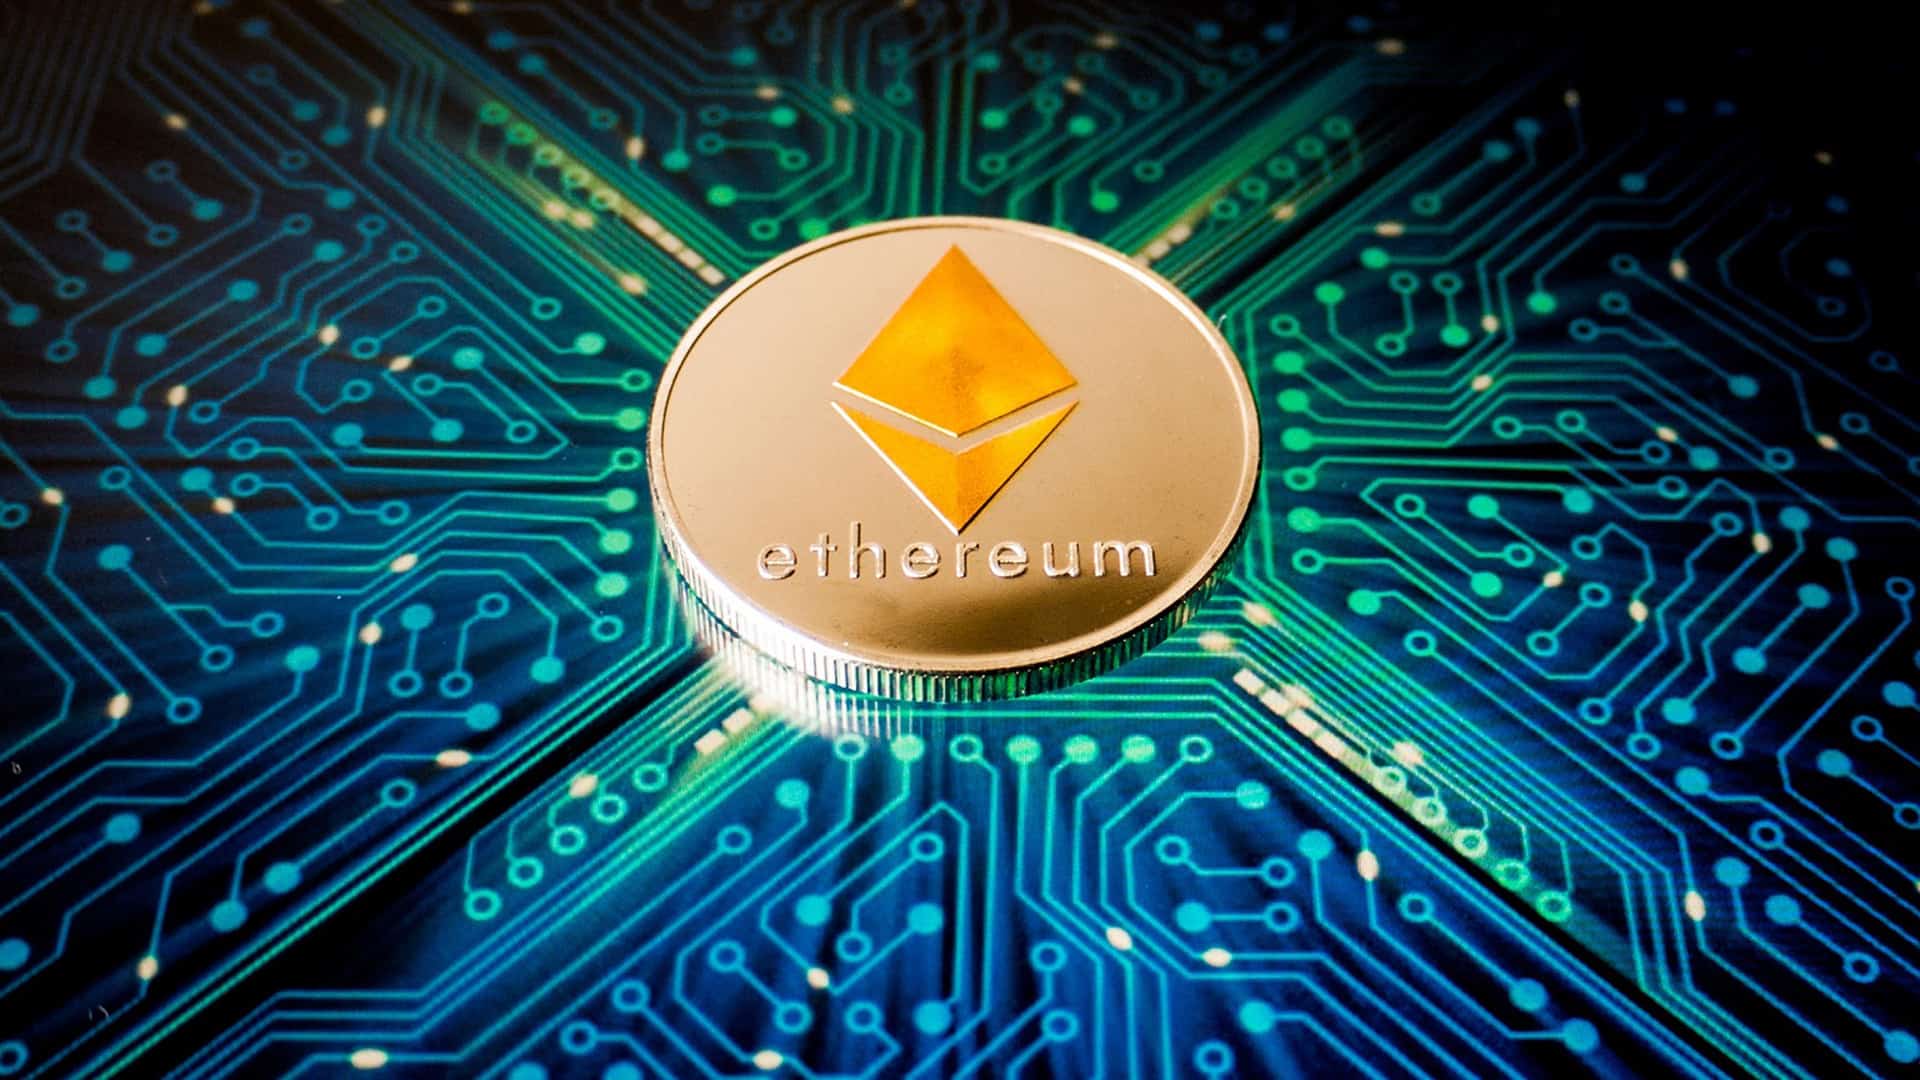 Ethereum Goerli Testnet Transitions To Proof-of-Stake (POS) Ahead Of The Merge